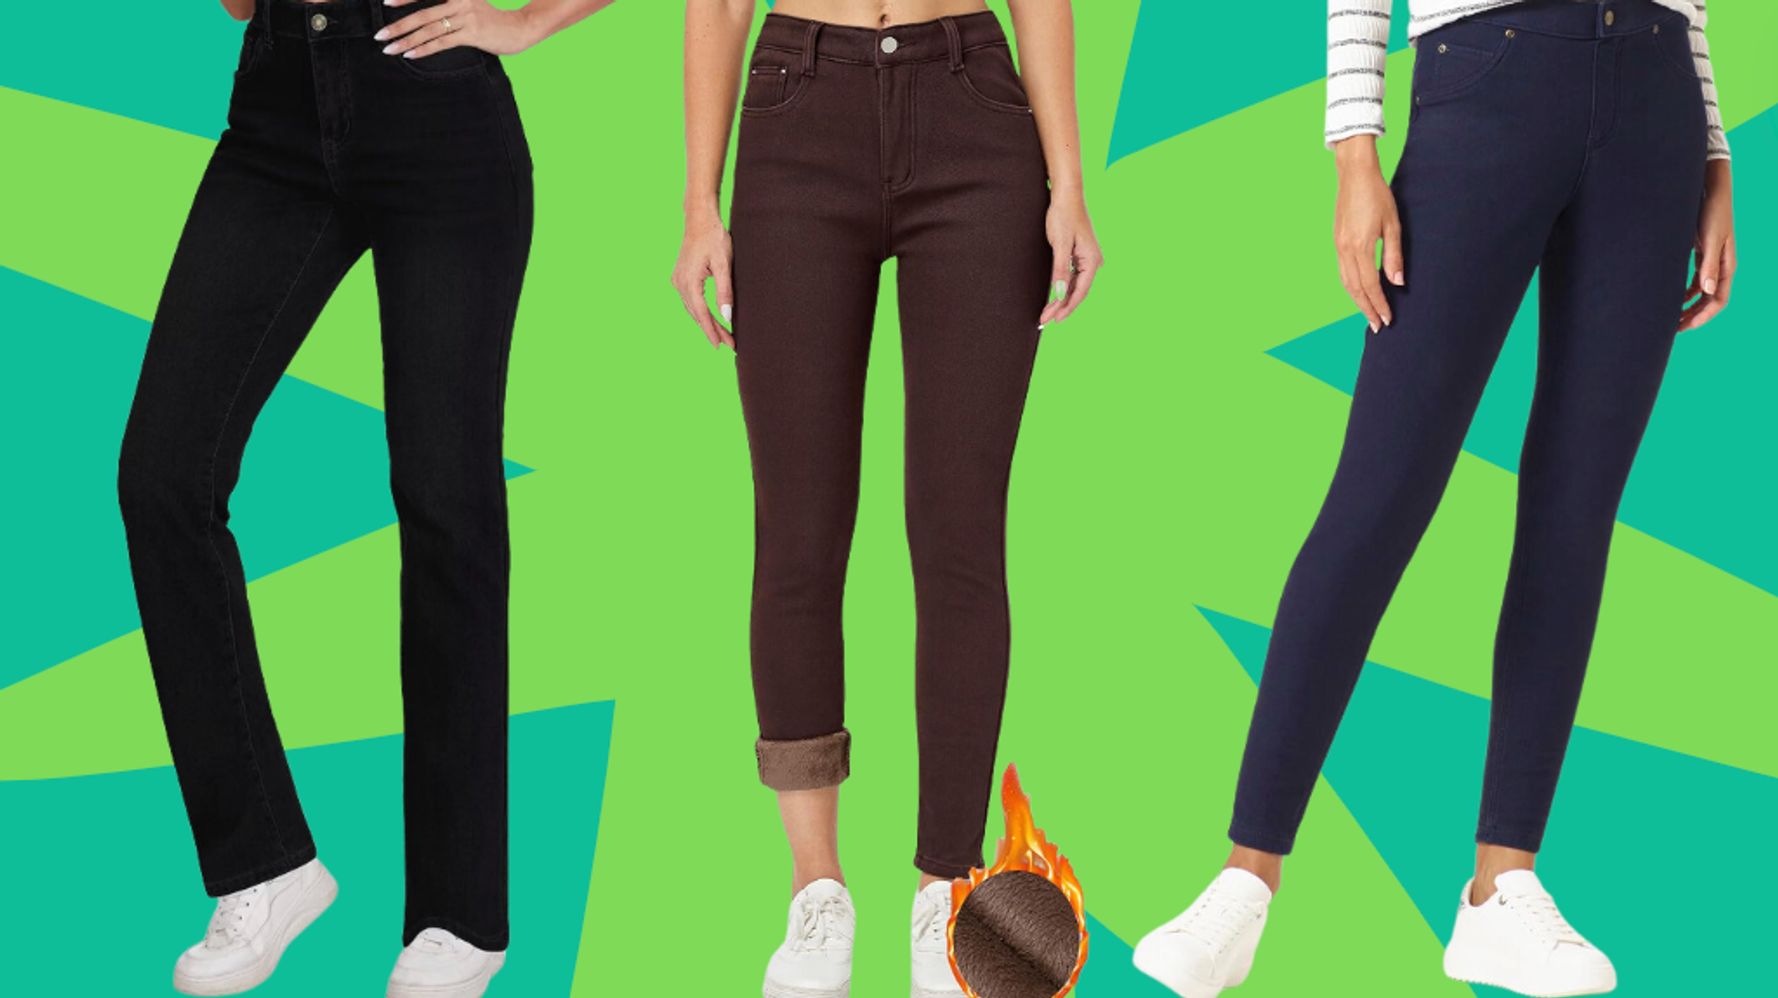 Shoppers Say These Comfy, Wrinkle-resistant Pants are the Perfect